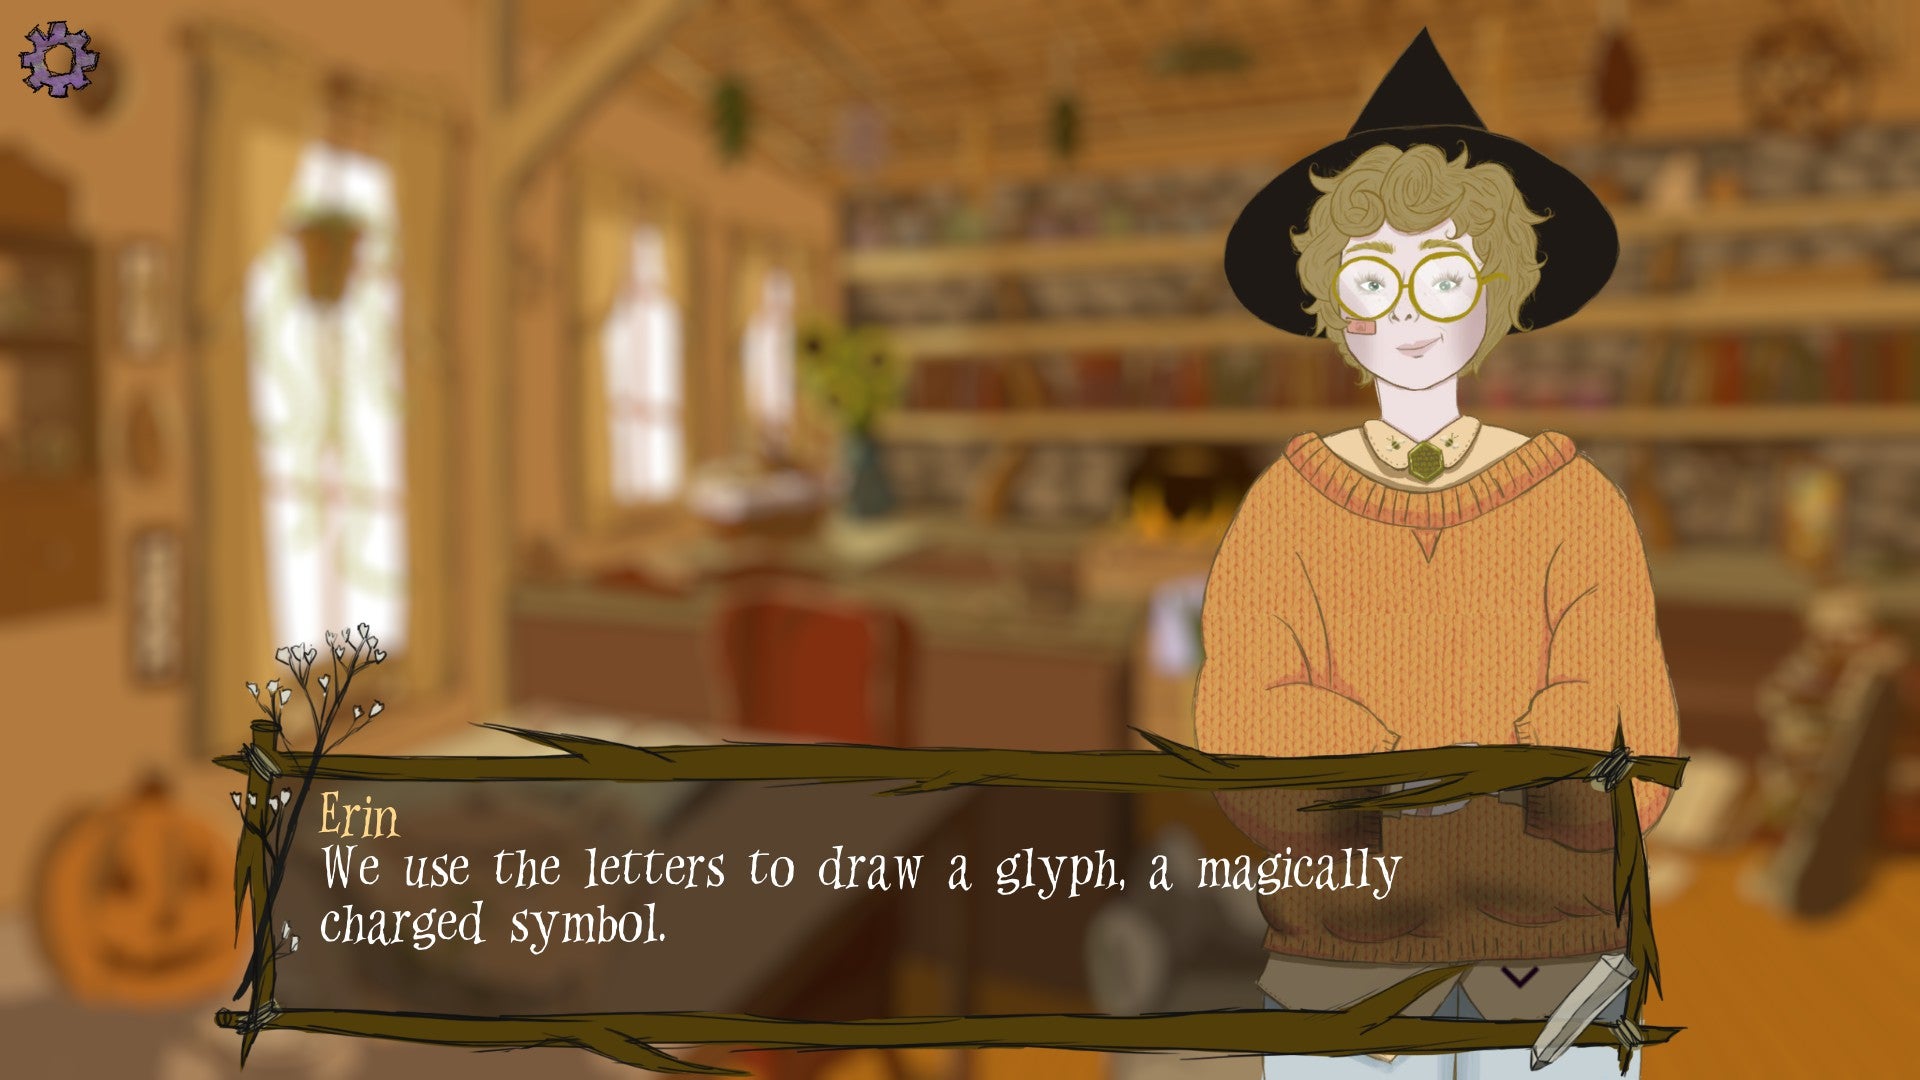 A So May It Be screenshot of Erin the witch who is wearing a cozy orange jumper in her cottage